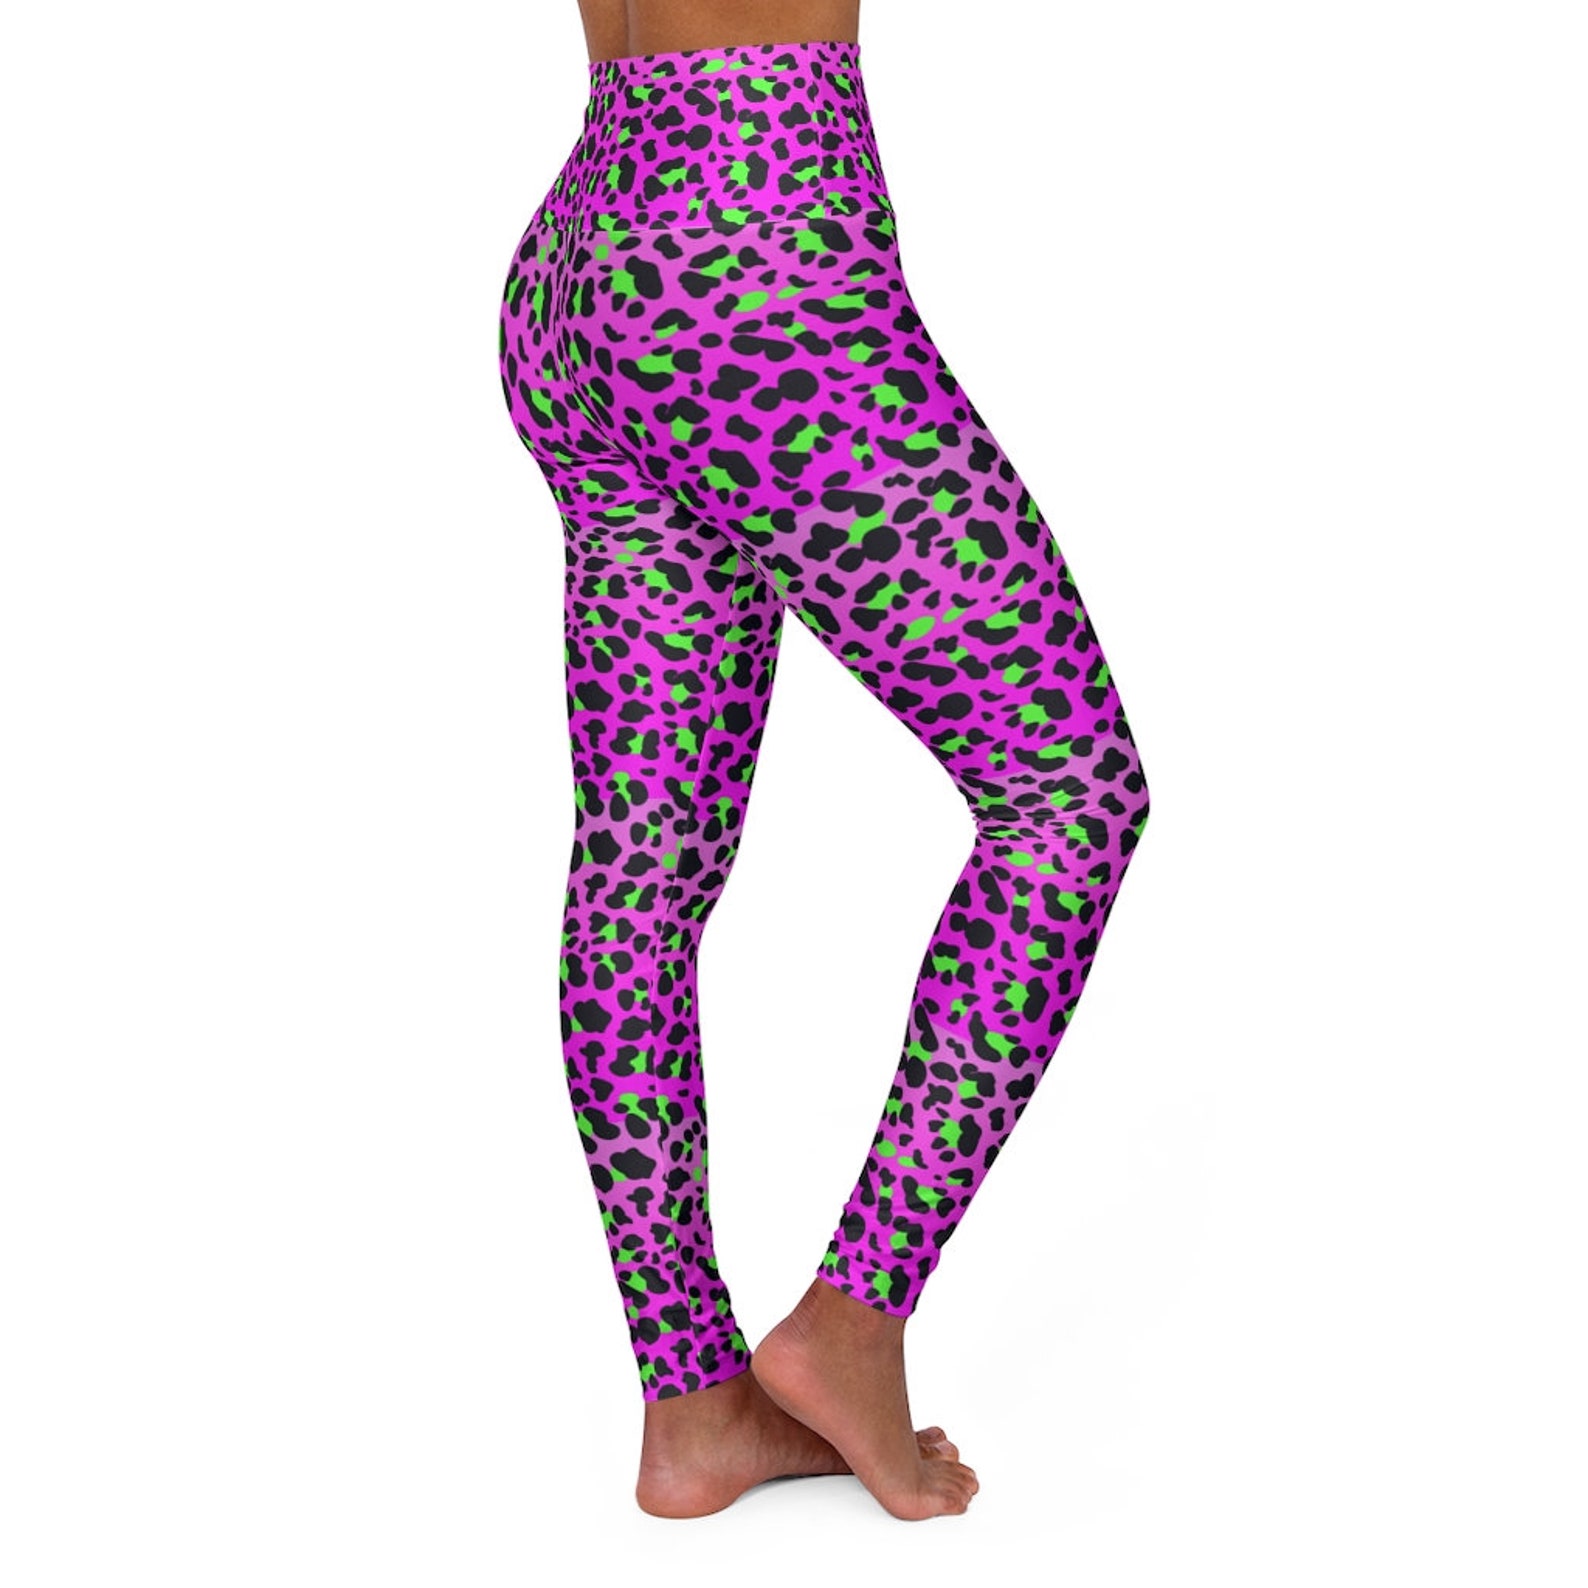 15 Minute Pink Leopard Workout Pants for Women